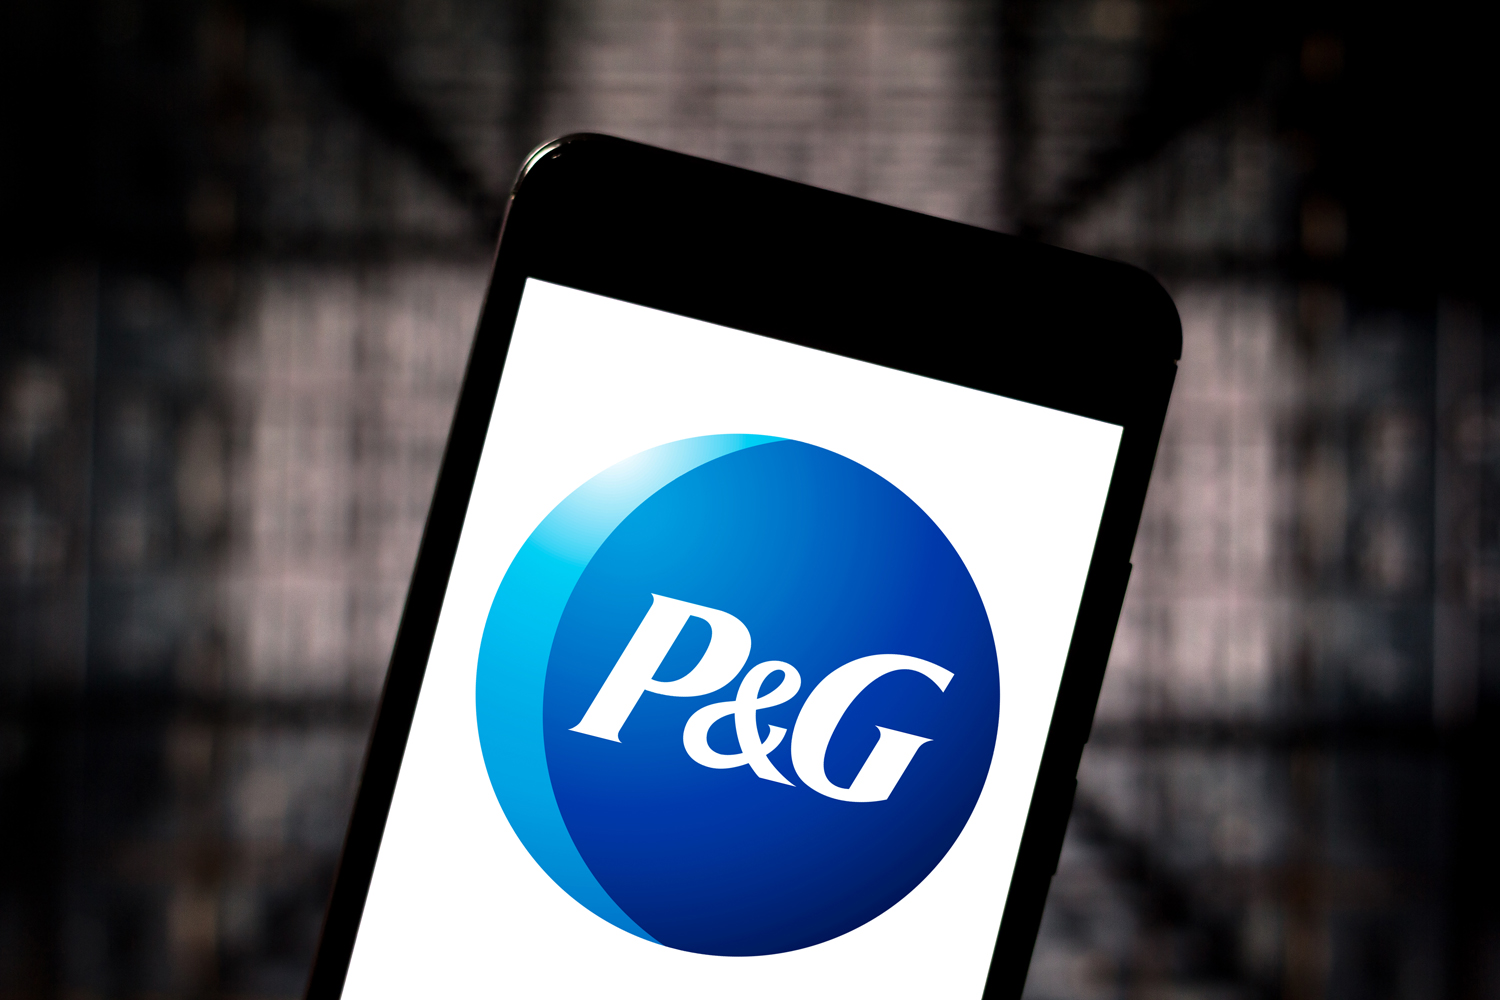 You are currently viewing More woes for Nigeria’s economy as P&G exit set to trigger loss of over 5,000 jobs